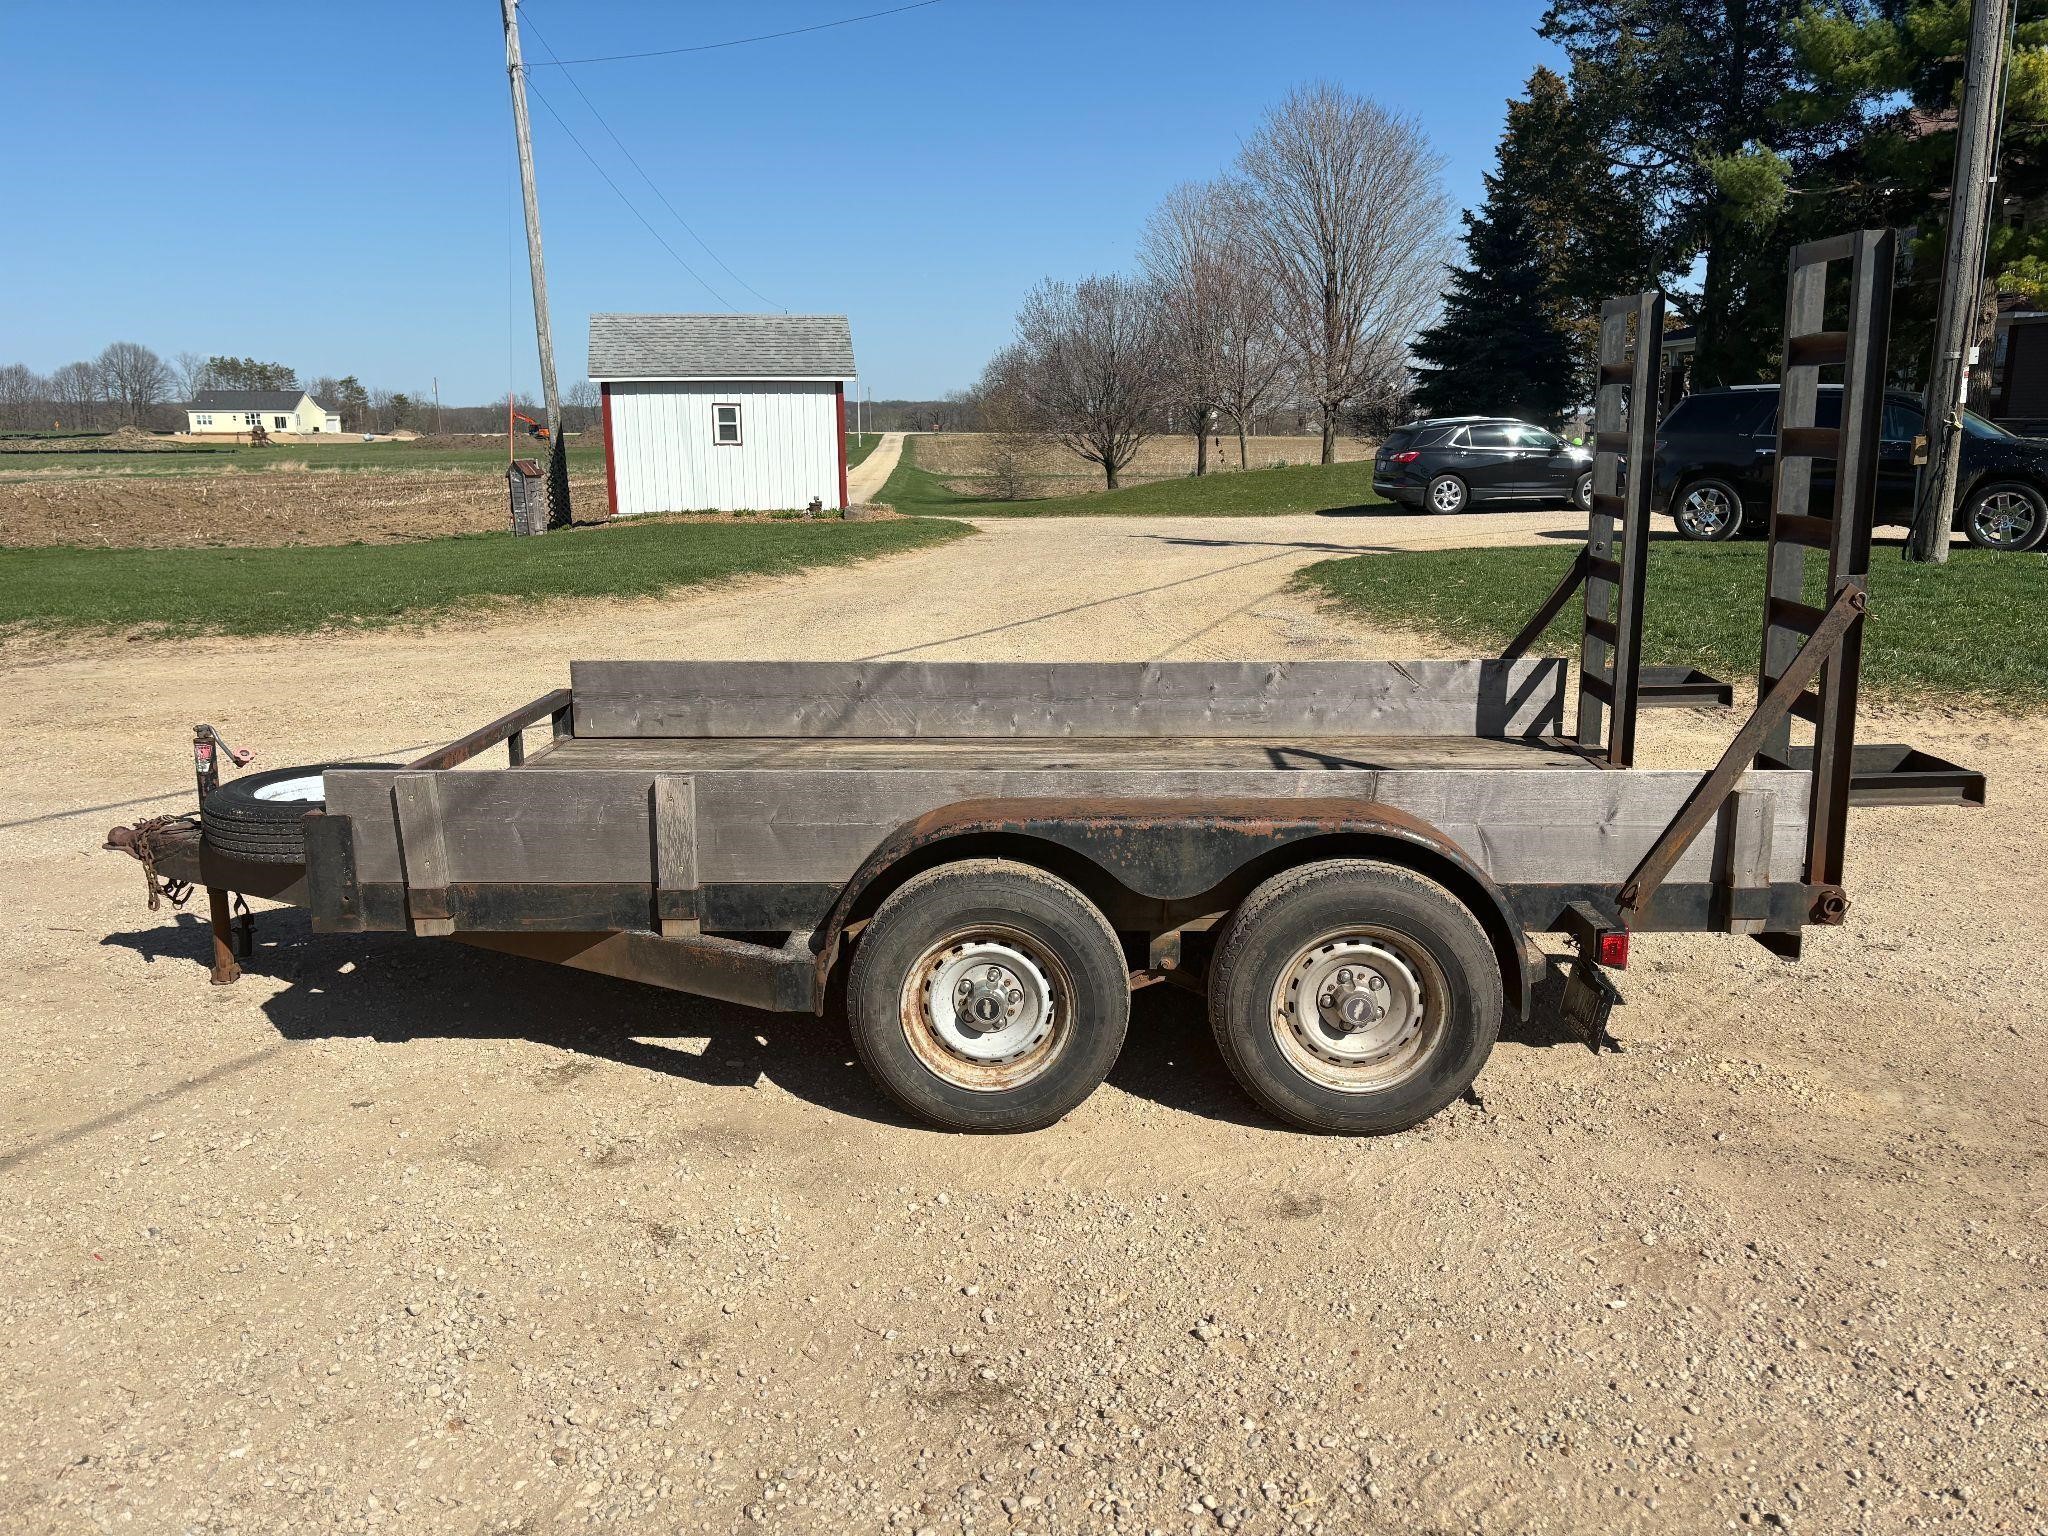 6.5’x12.5’ Double Axle Flatbed Trailer w/ Ramps